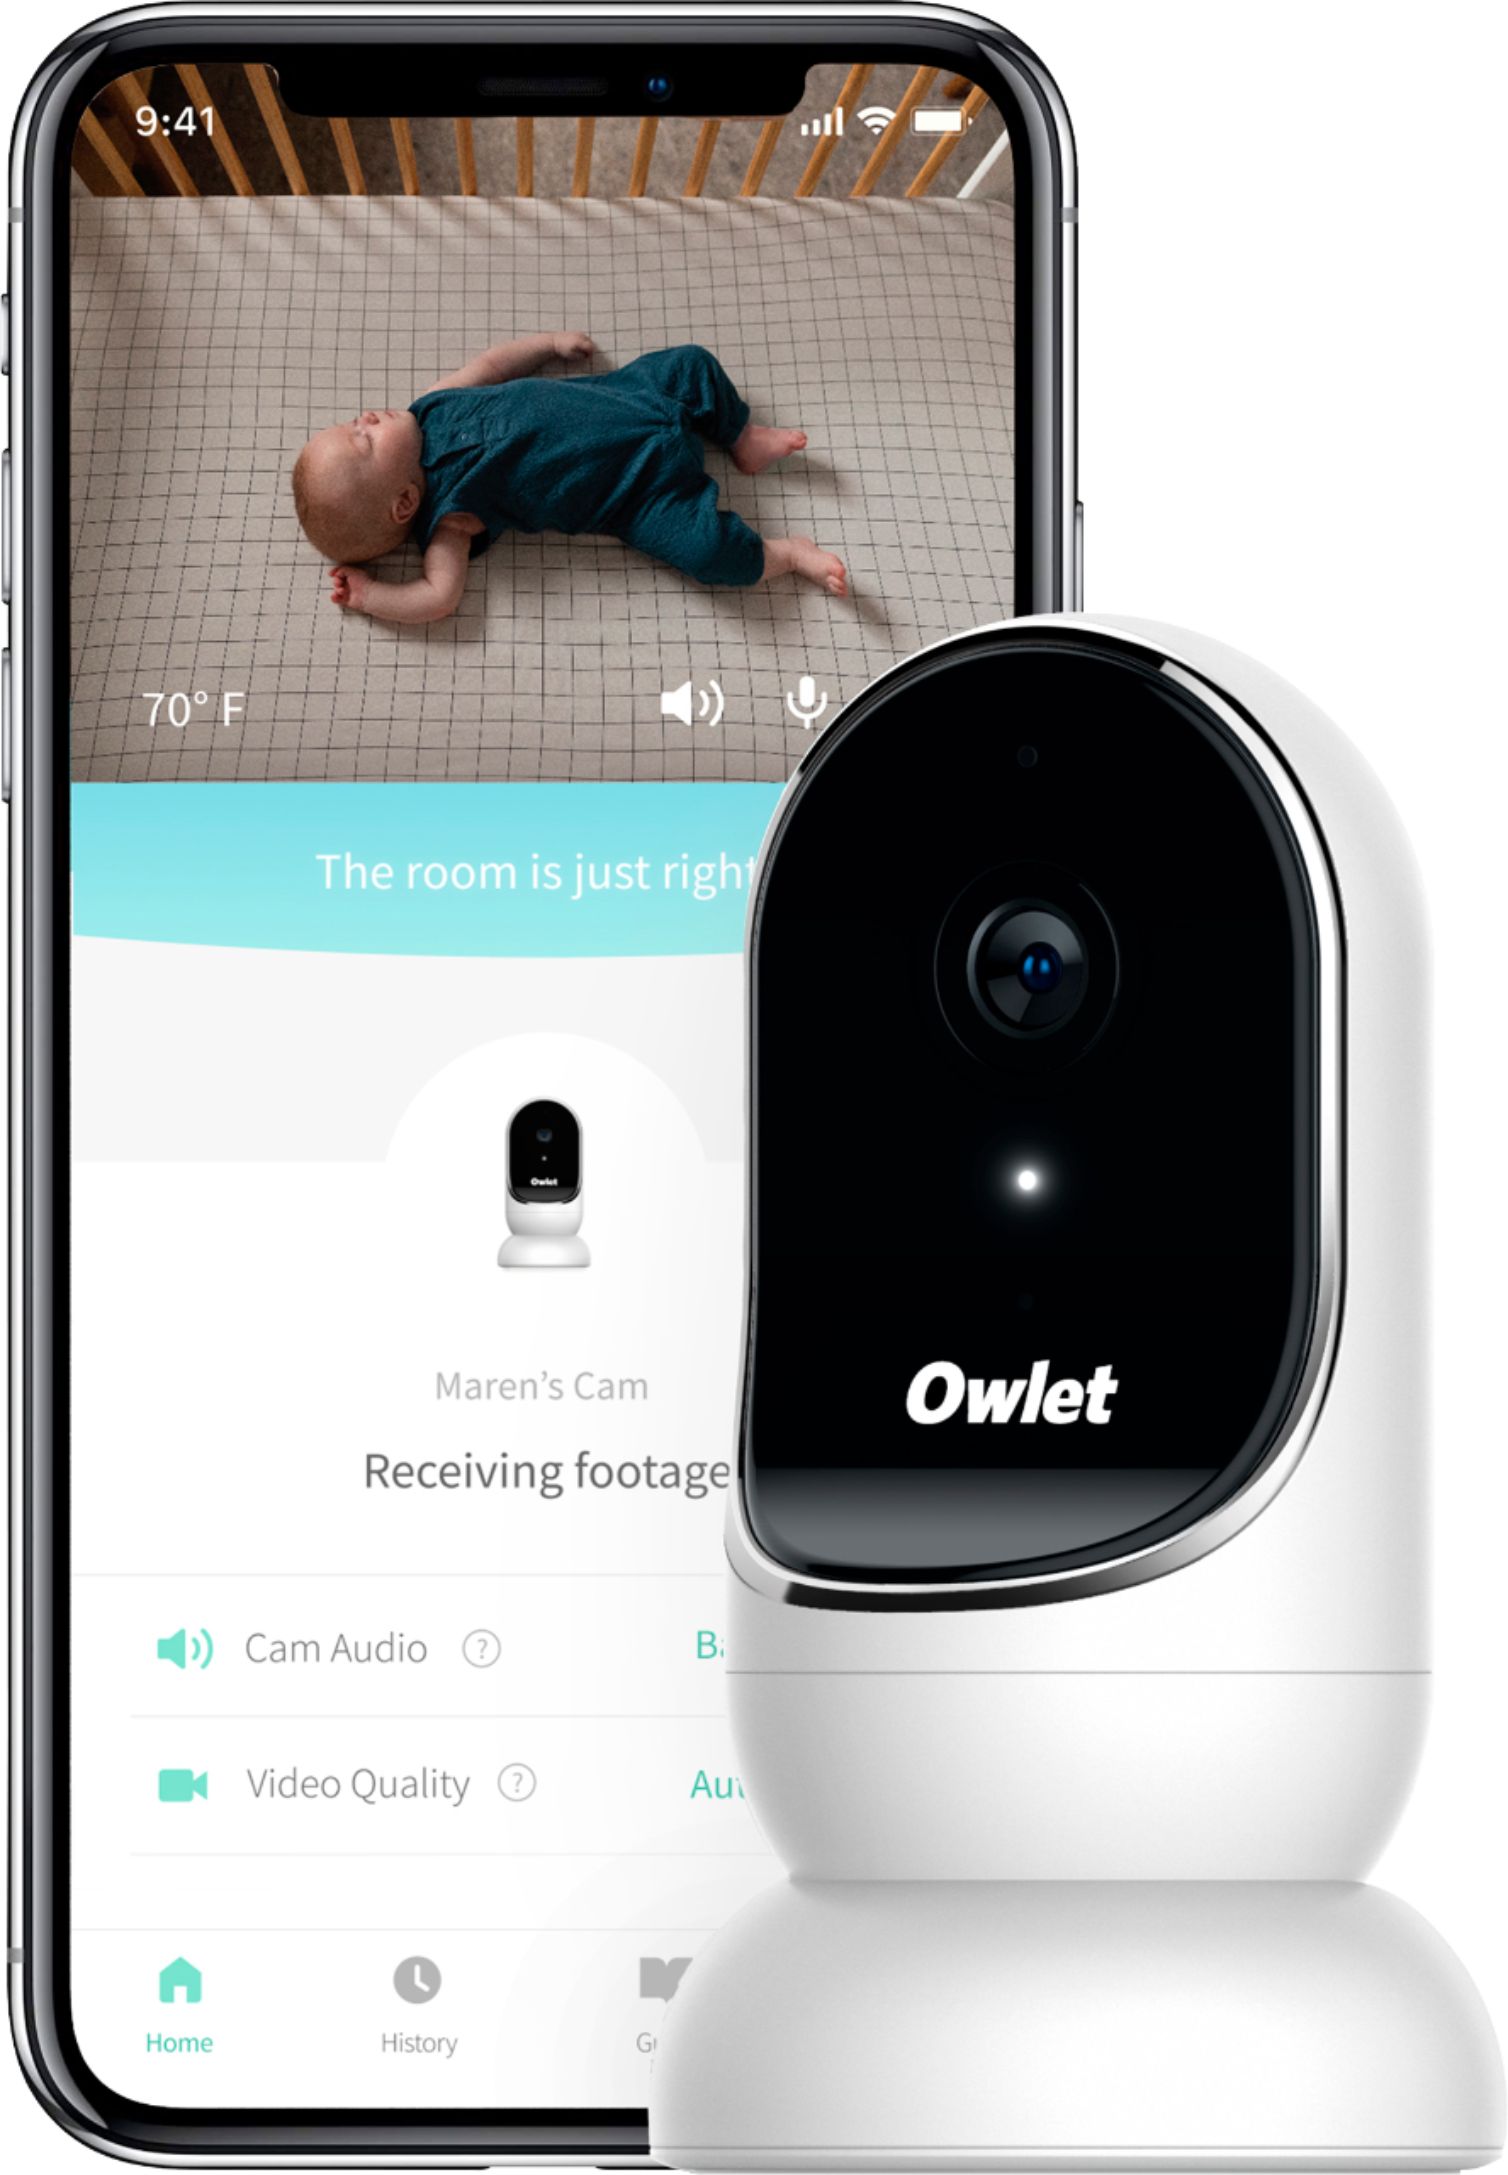 Brighton Butler baby monitor review, owlet baby monitor